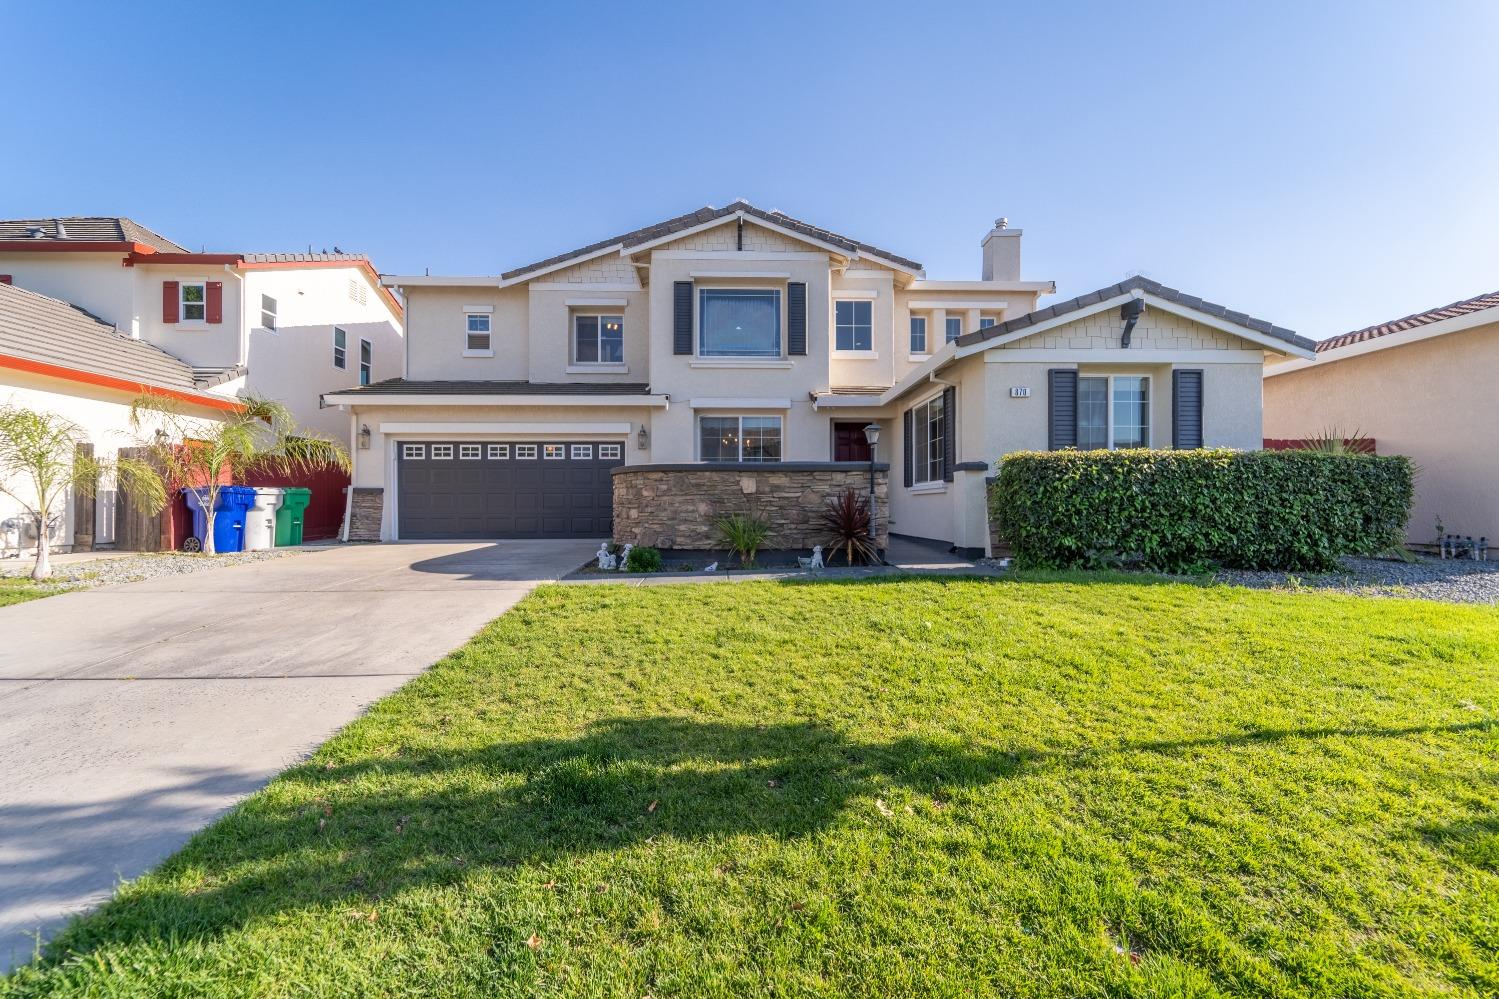 Photo of 870 Alabaster Ct in Atwater, CA